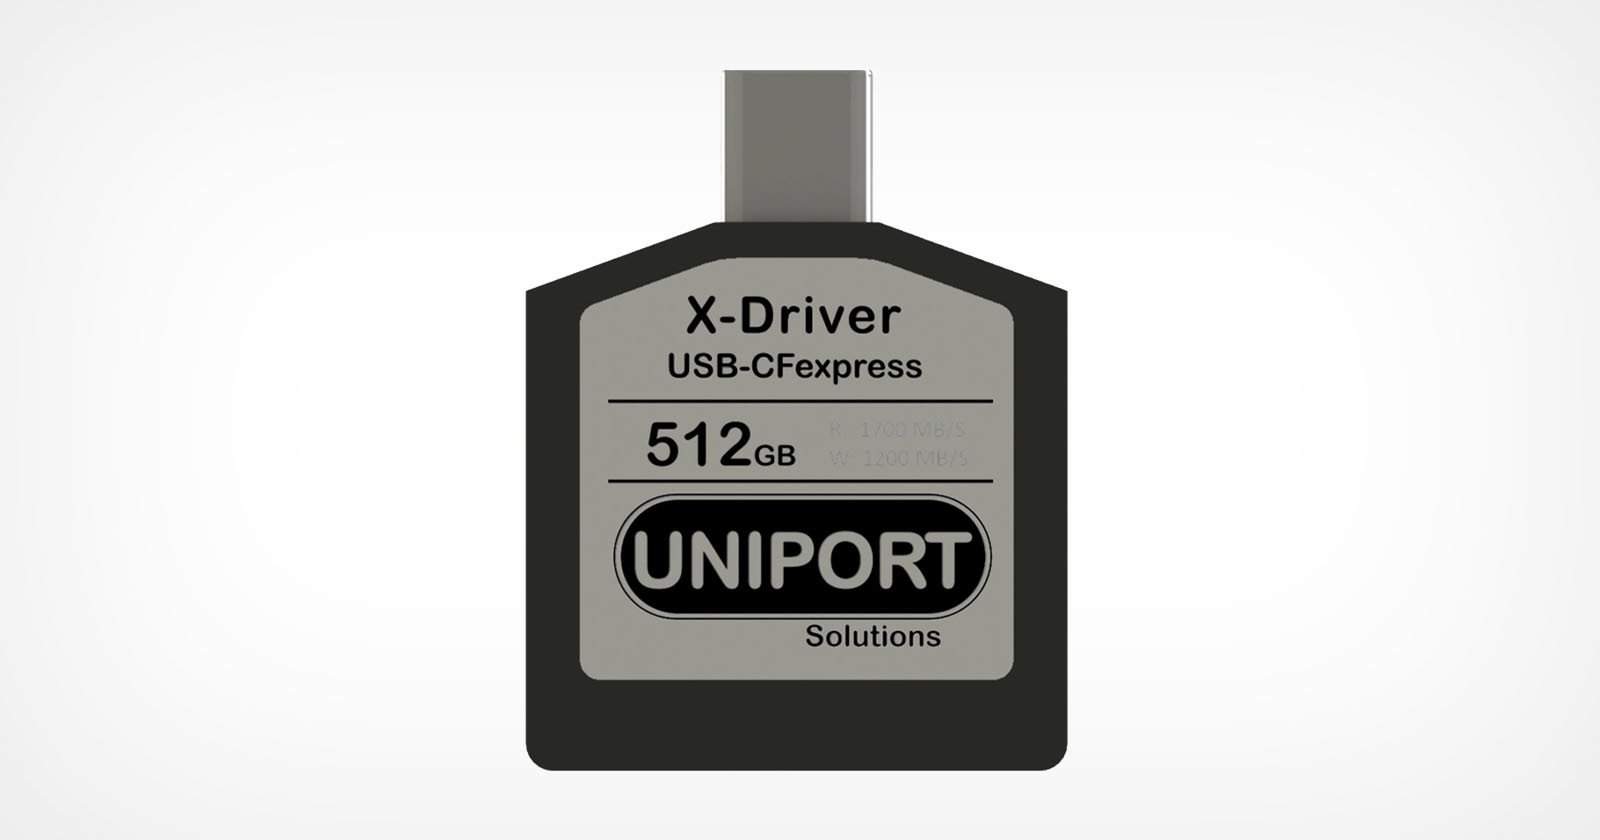 No Reader Necessary: The X-Driver CFexpress Card Has Built-In USB-C